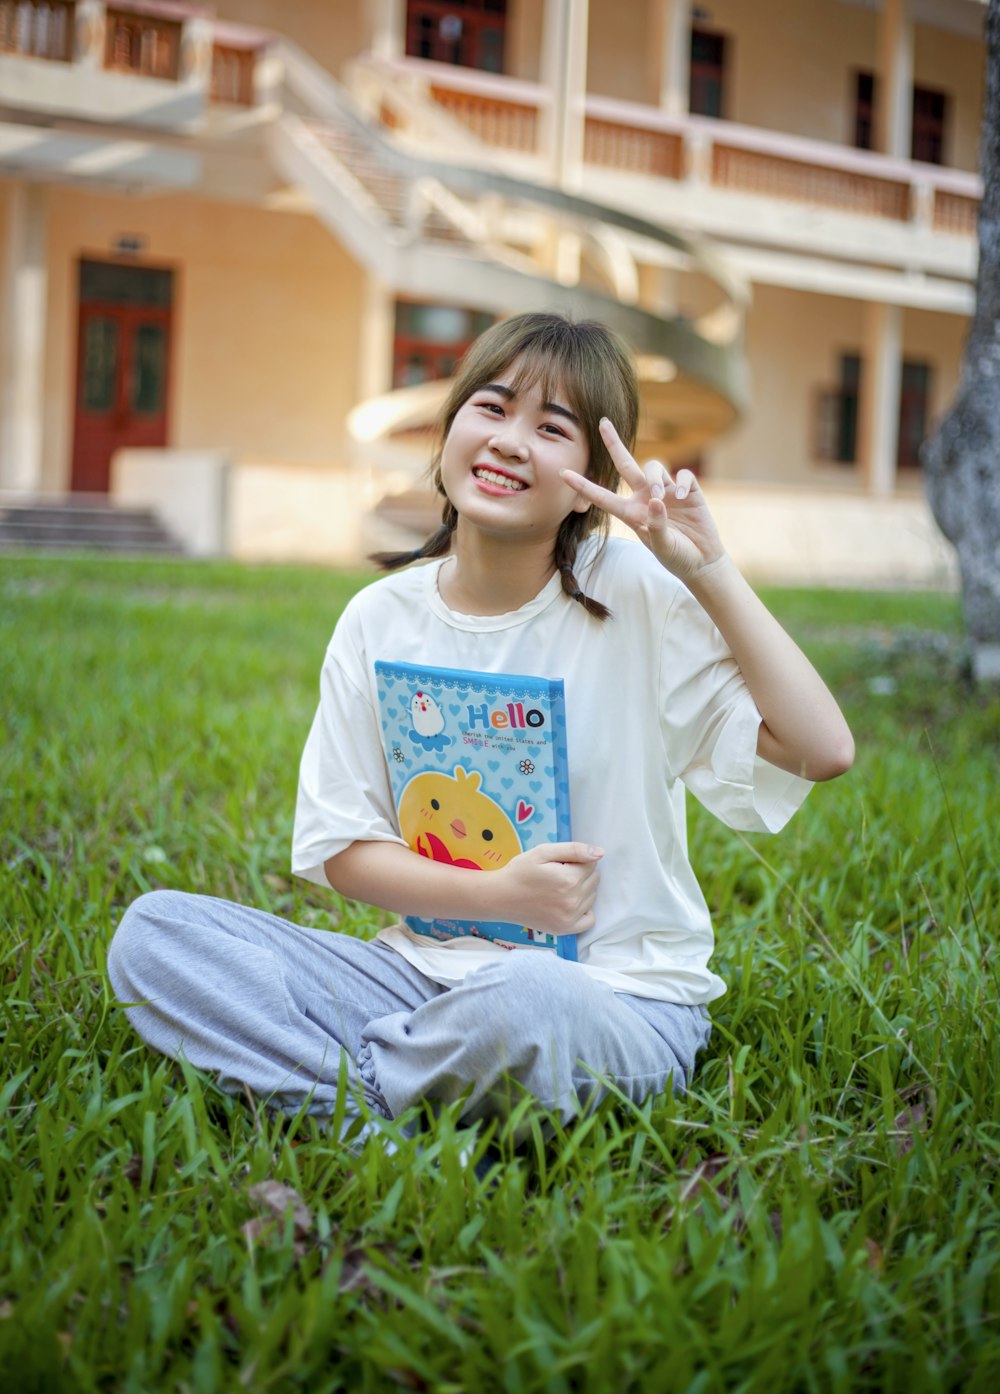 a young girl sitting in the grass holding a book